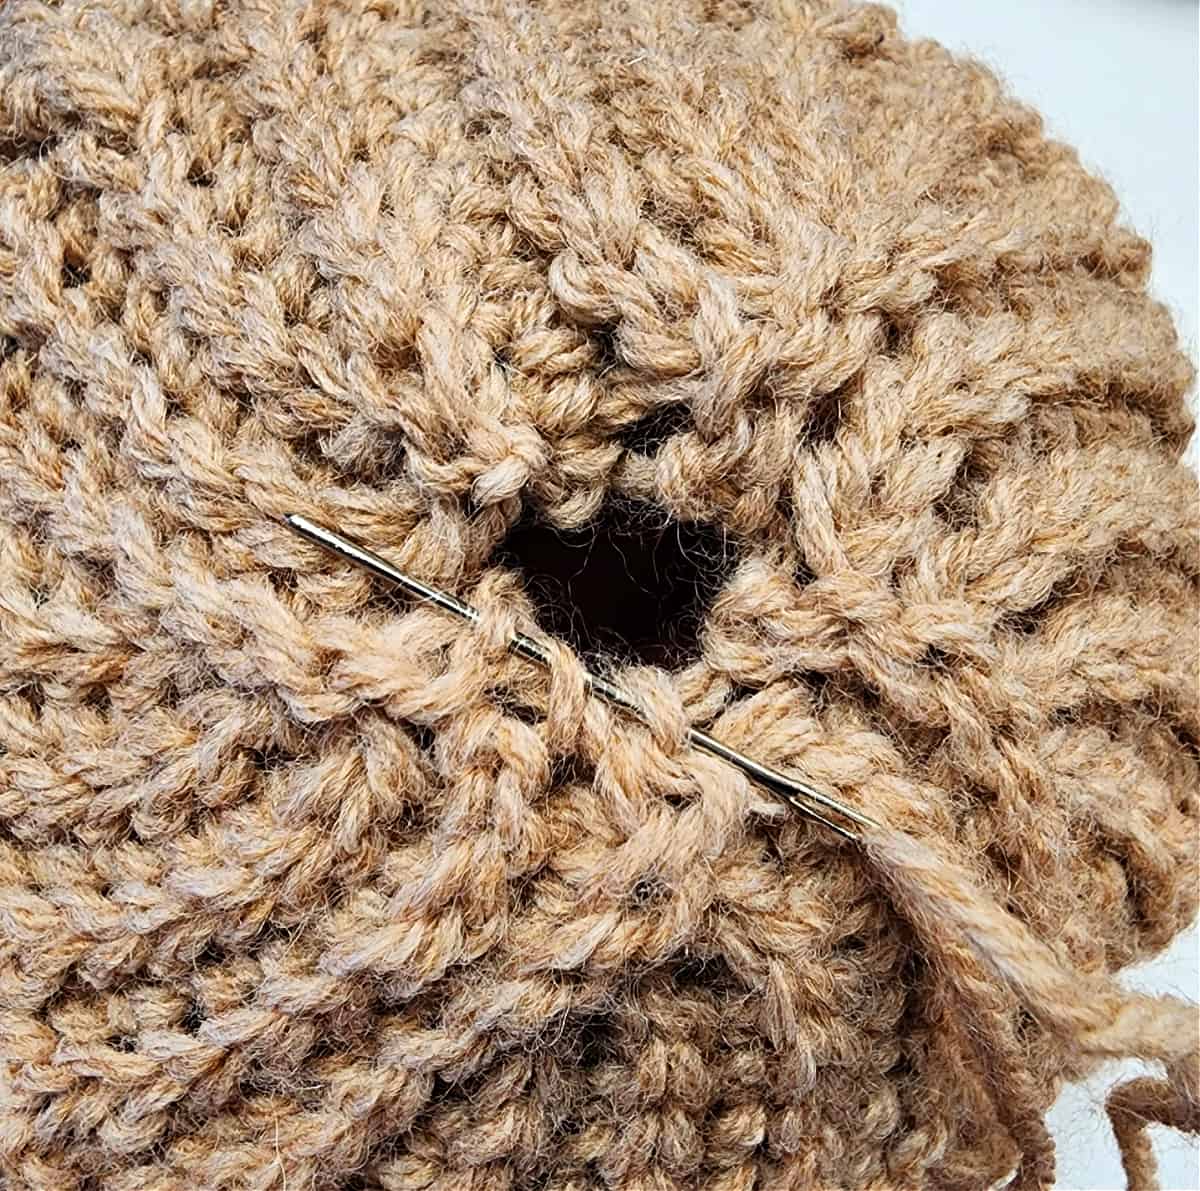 Crochet hat with gap in crown being sewn closed with a yarn needle and tail of yarn.